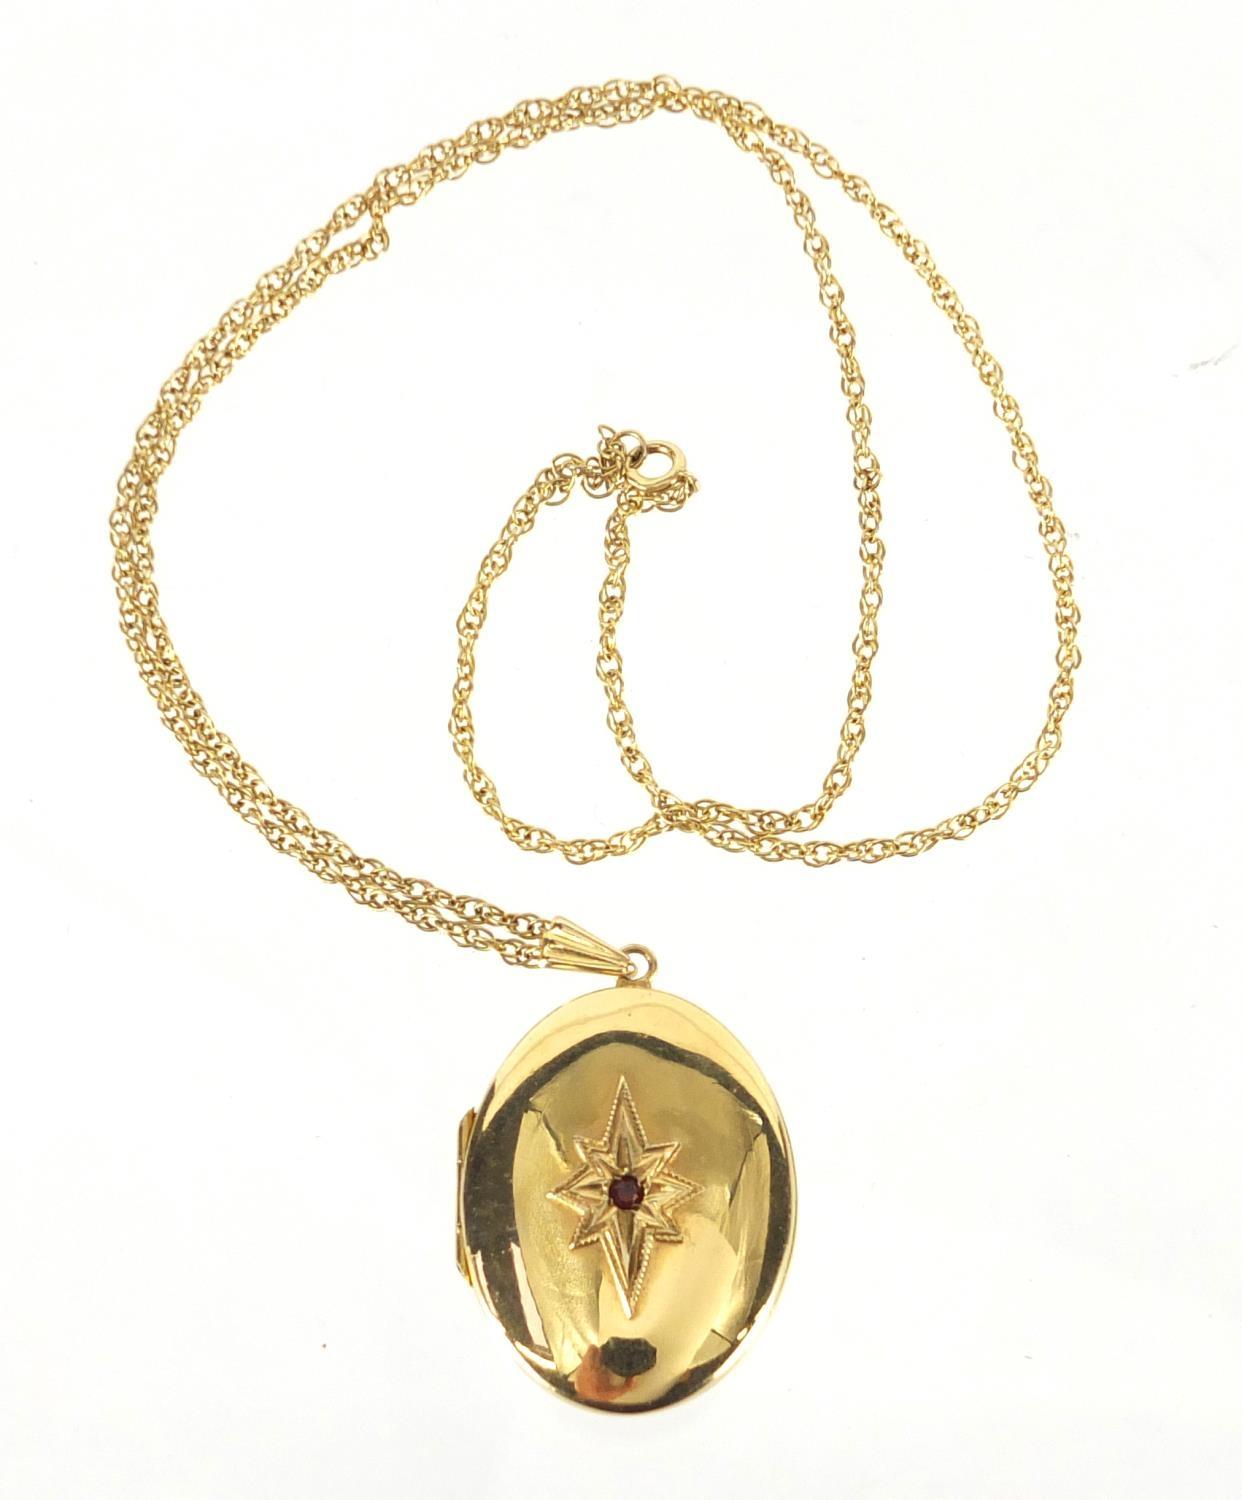 Oval 9ct gold locket set with a garnet on a 9ct gold necklace, the locket 4cm in length, approximate - Image 2 of 4